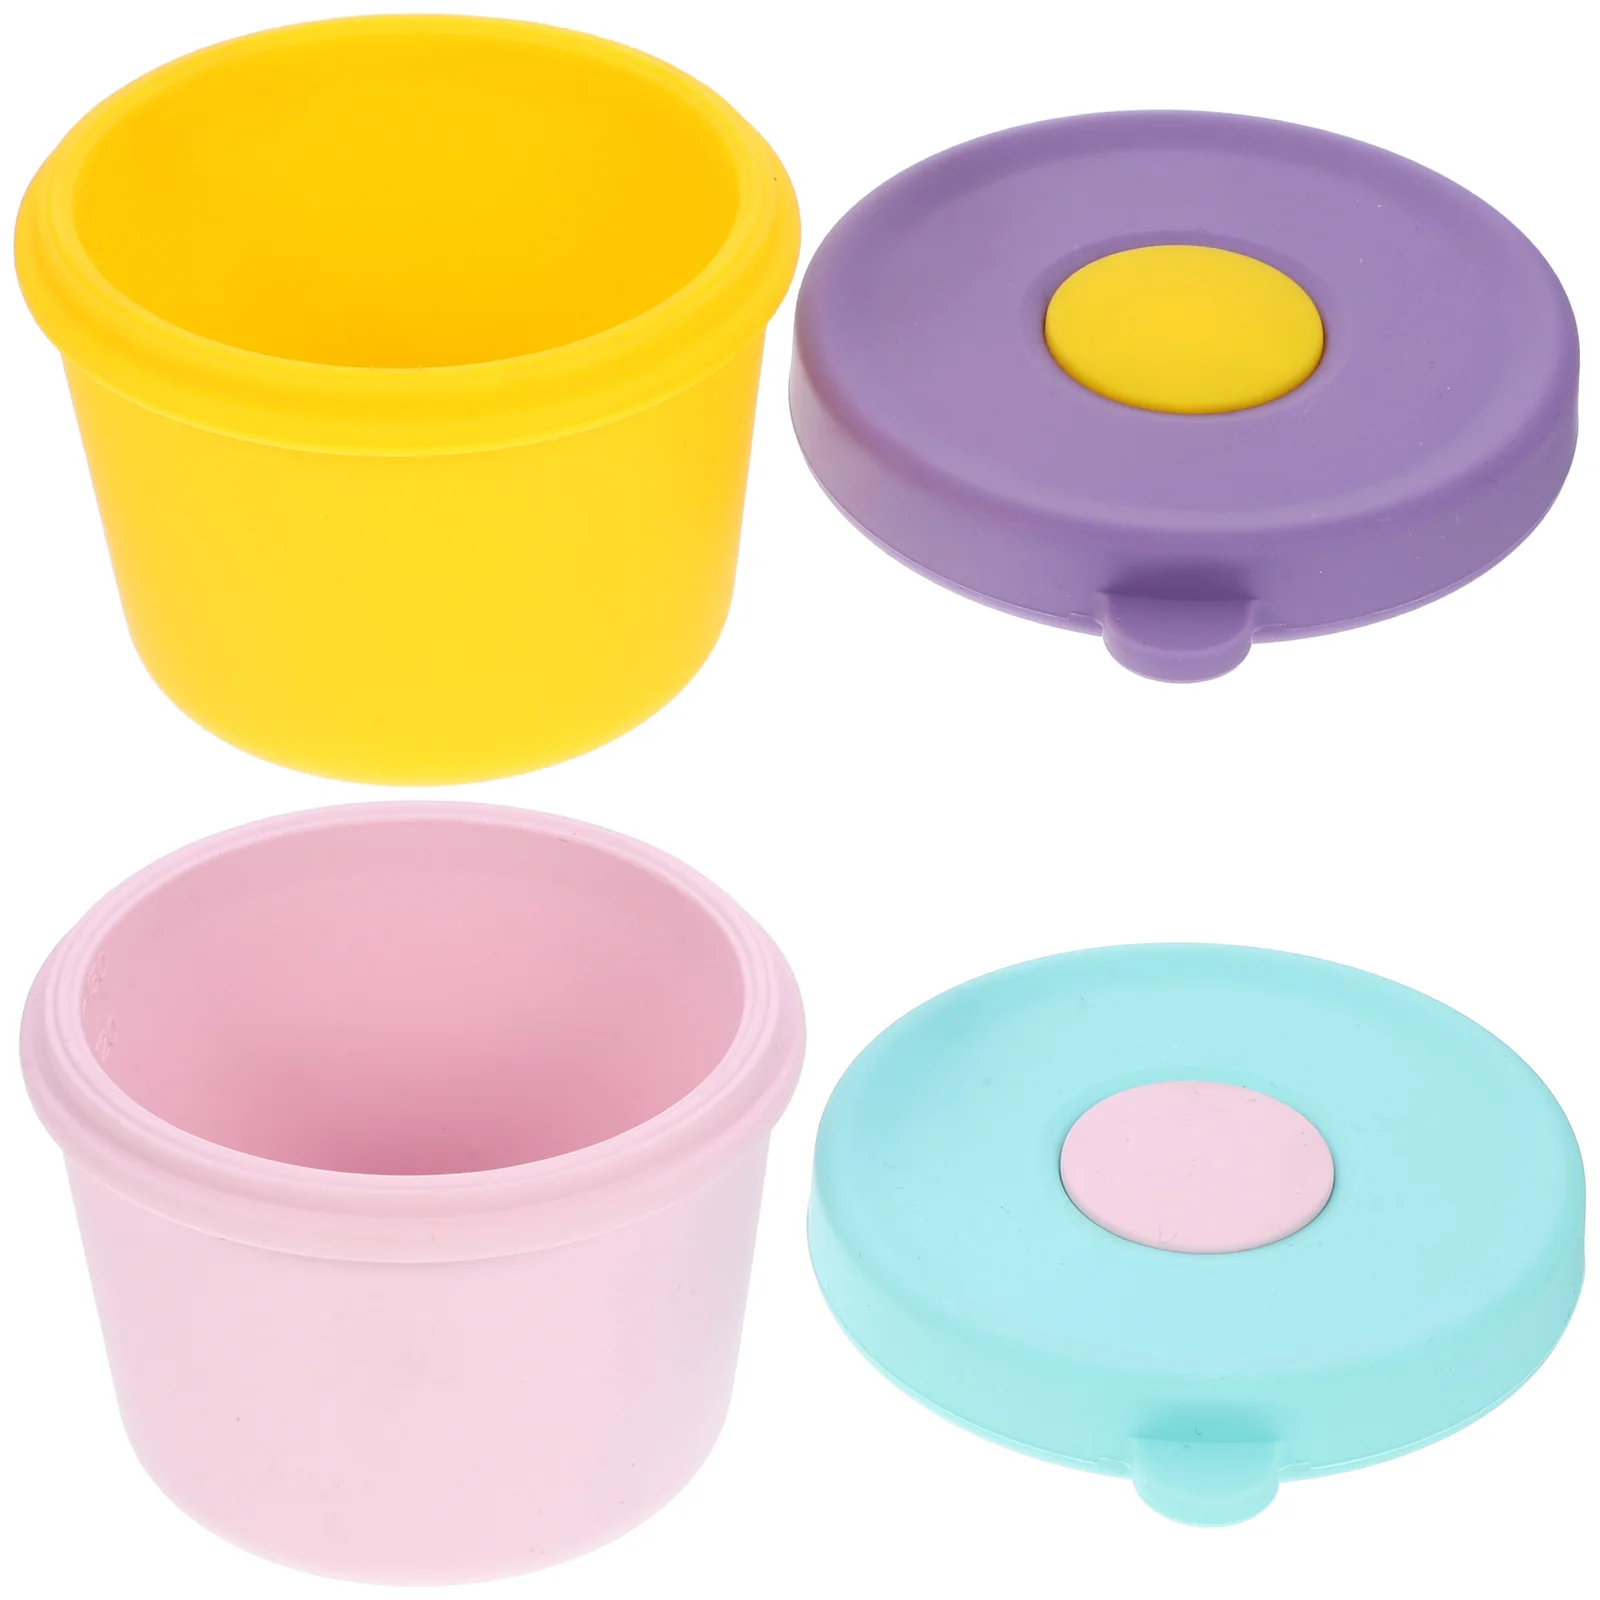 

2 Pcs Silicone Sauce Cup Dressing Containers Condiment with Lids Storage Silica Gel Dip Cups Travel